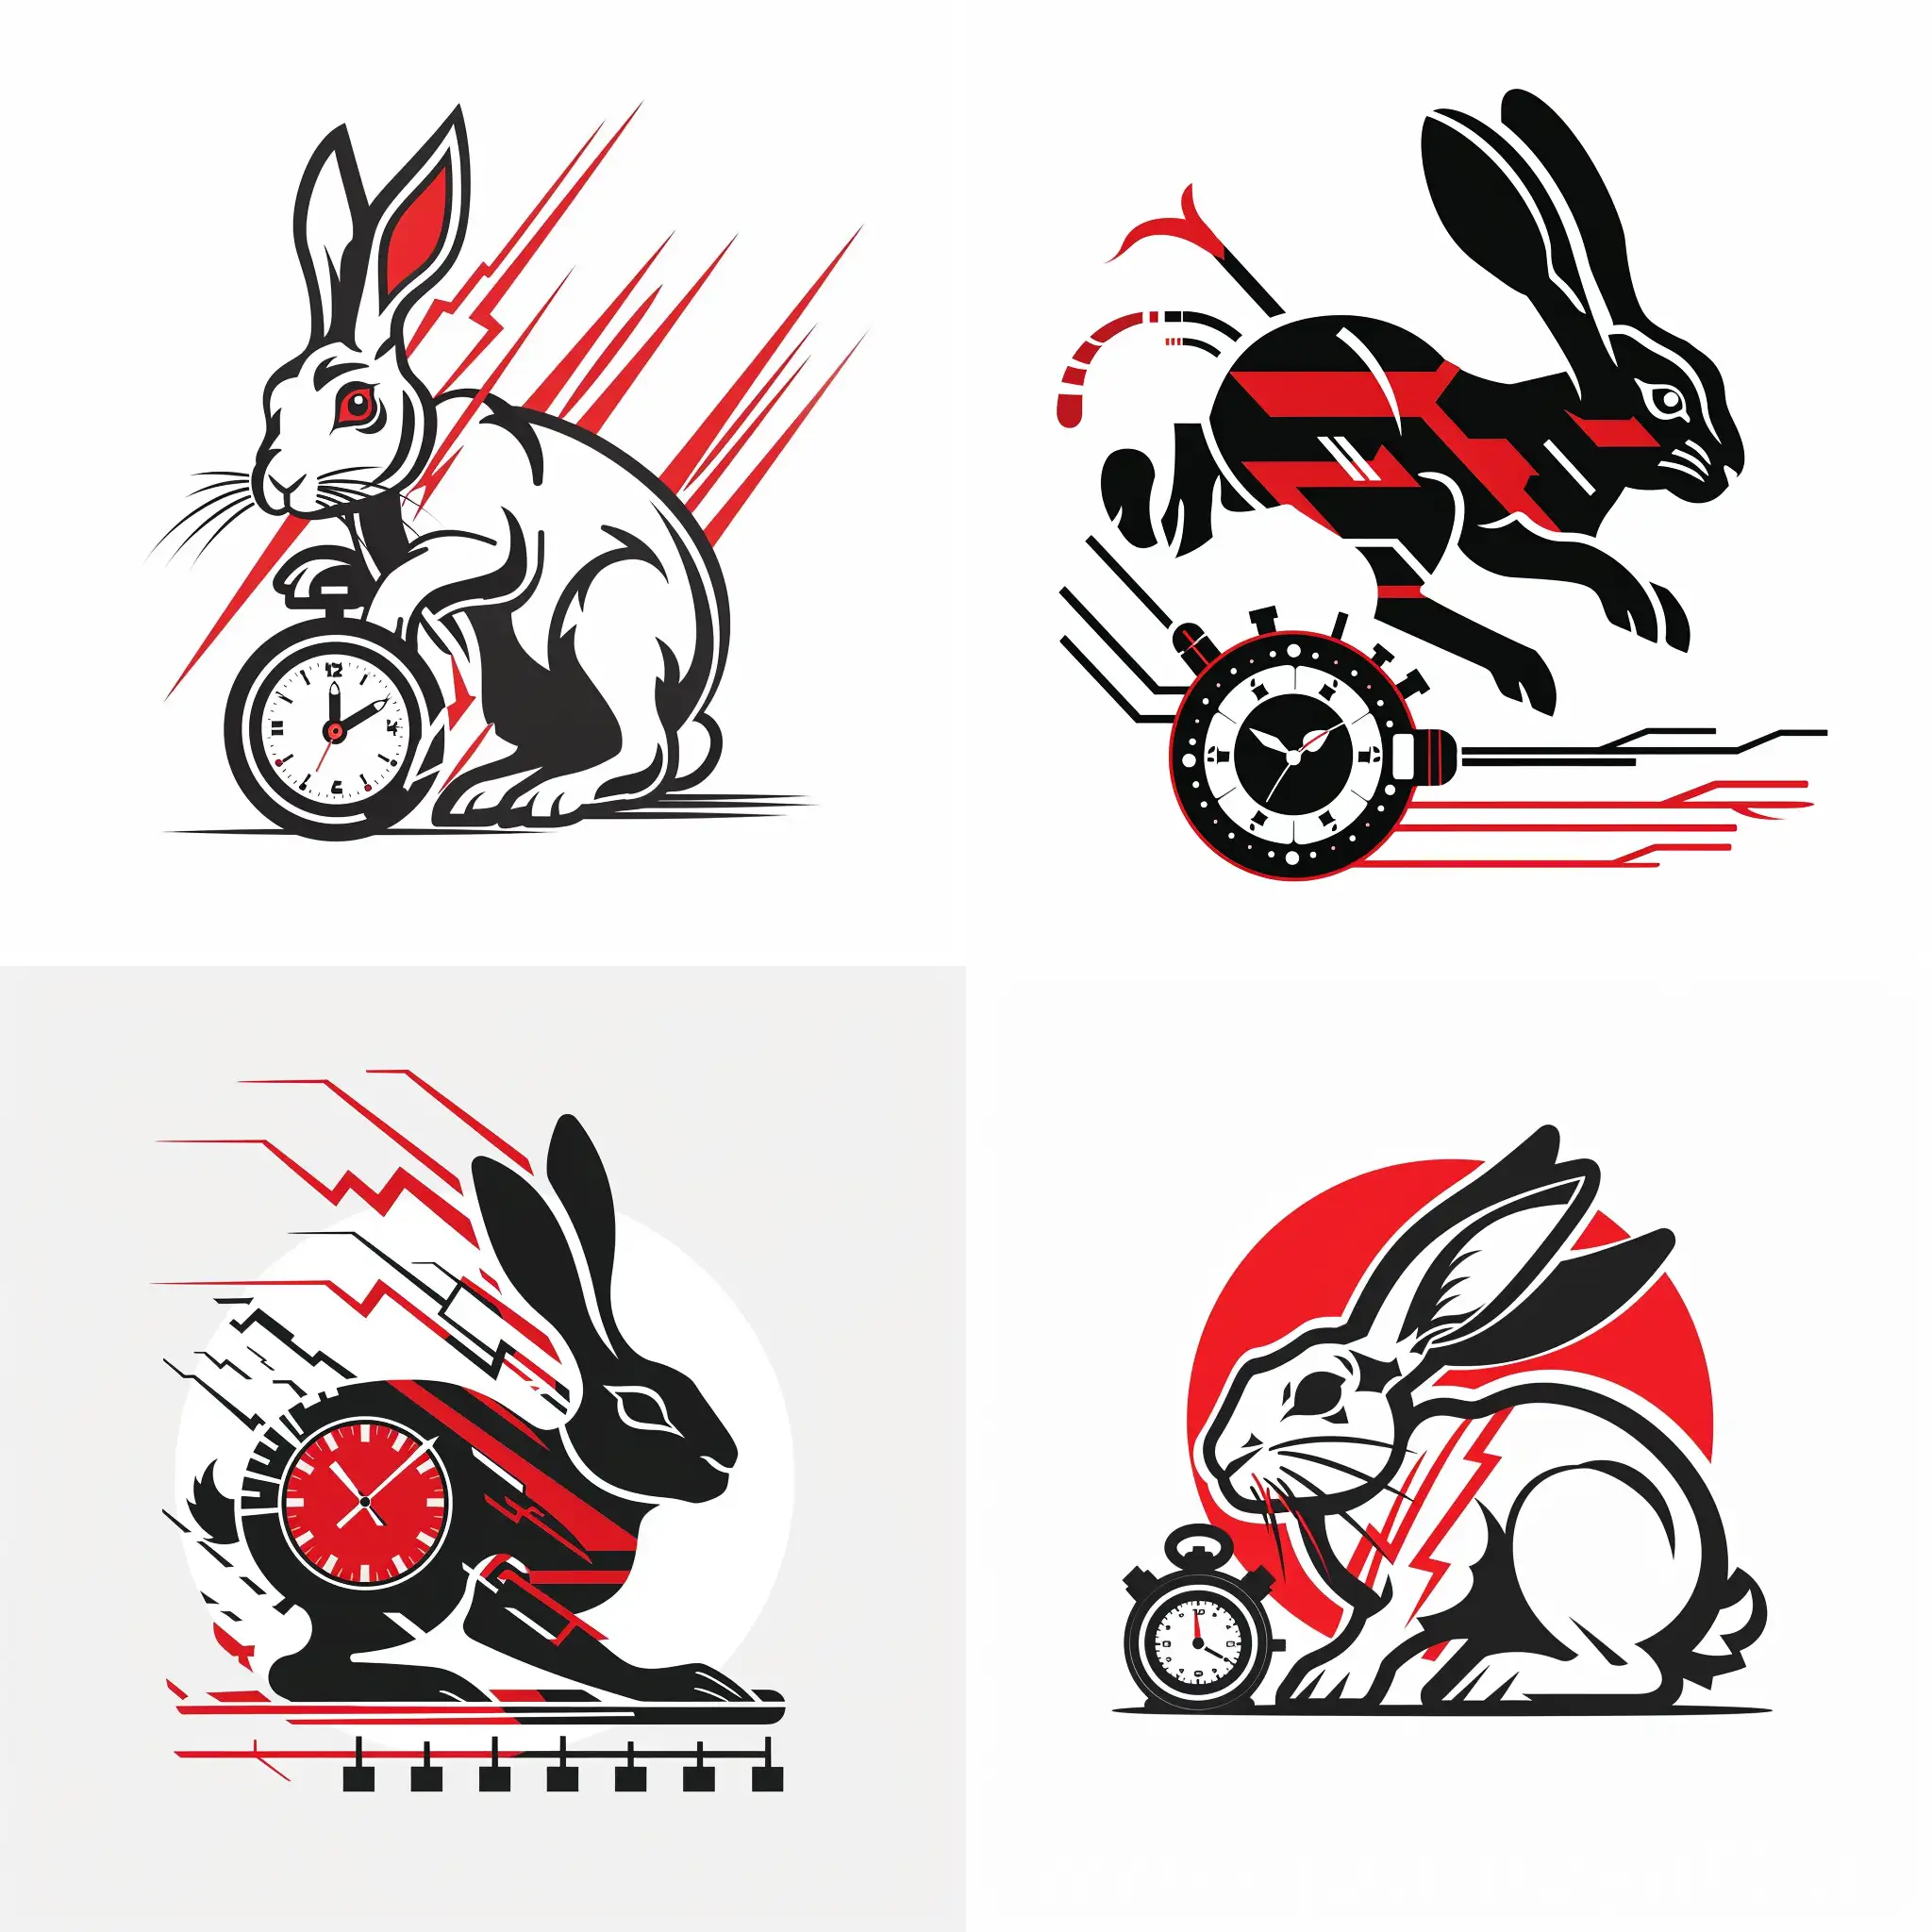 logo with electronic high voltage streamlined simplified running electronic hare with a stopwatch high voltage electricity in red black and white on a white background